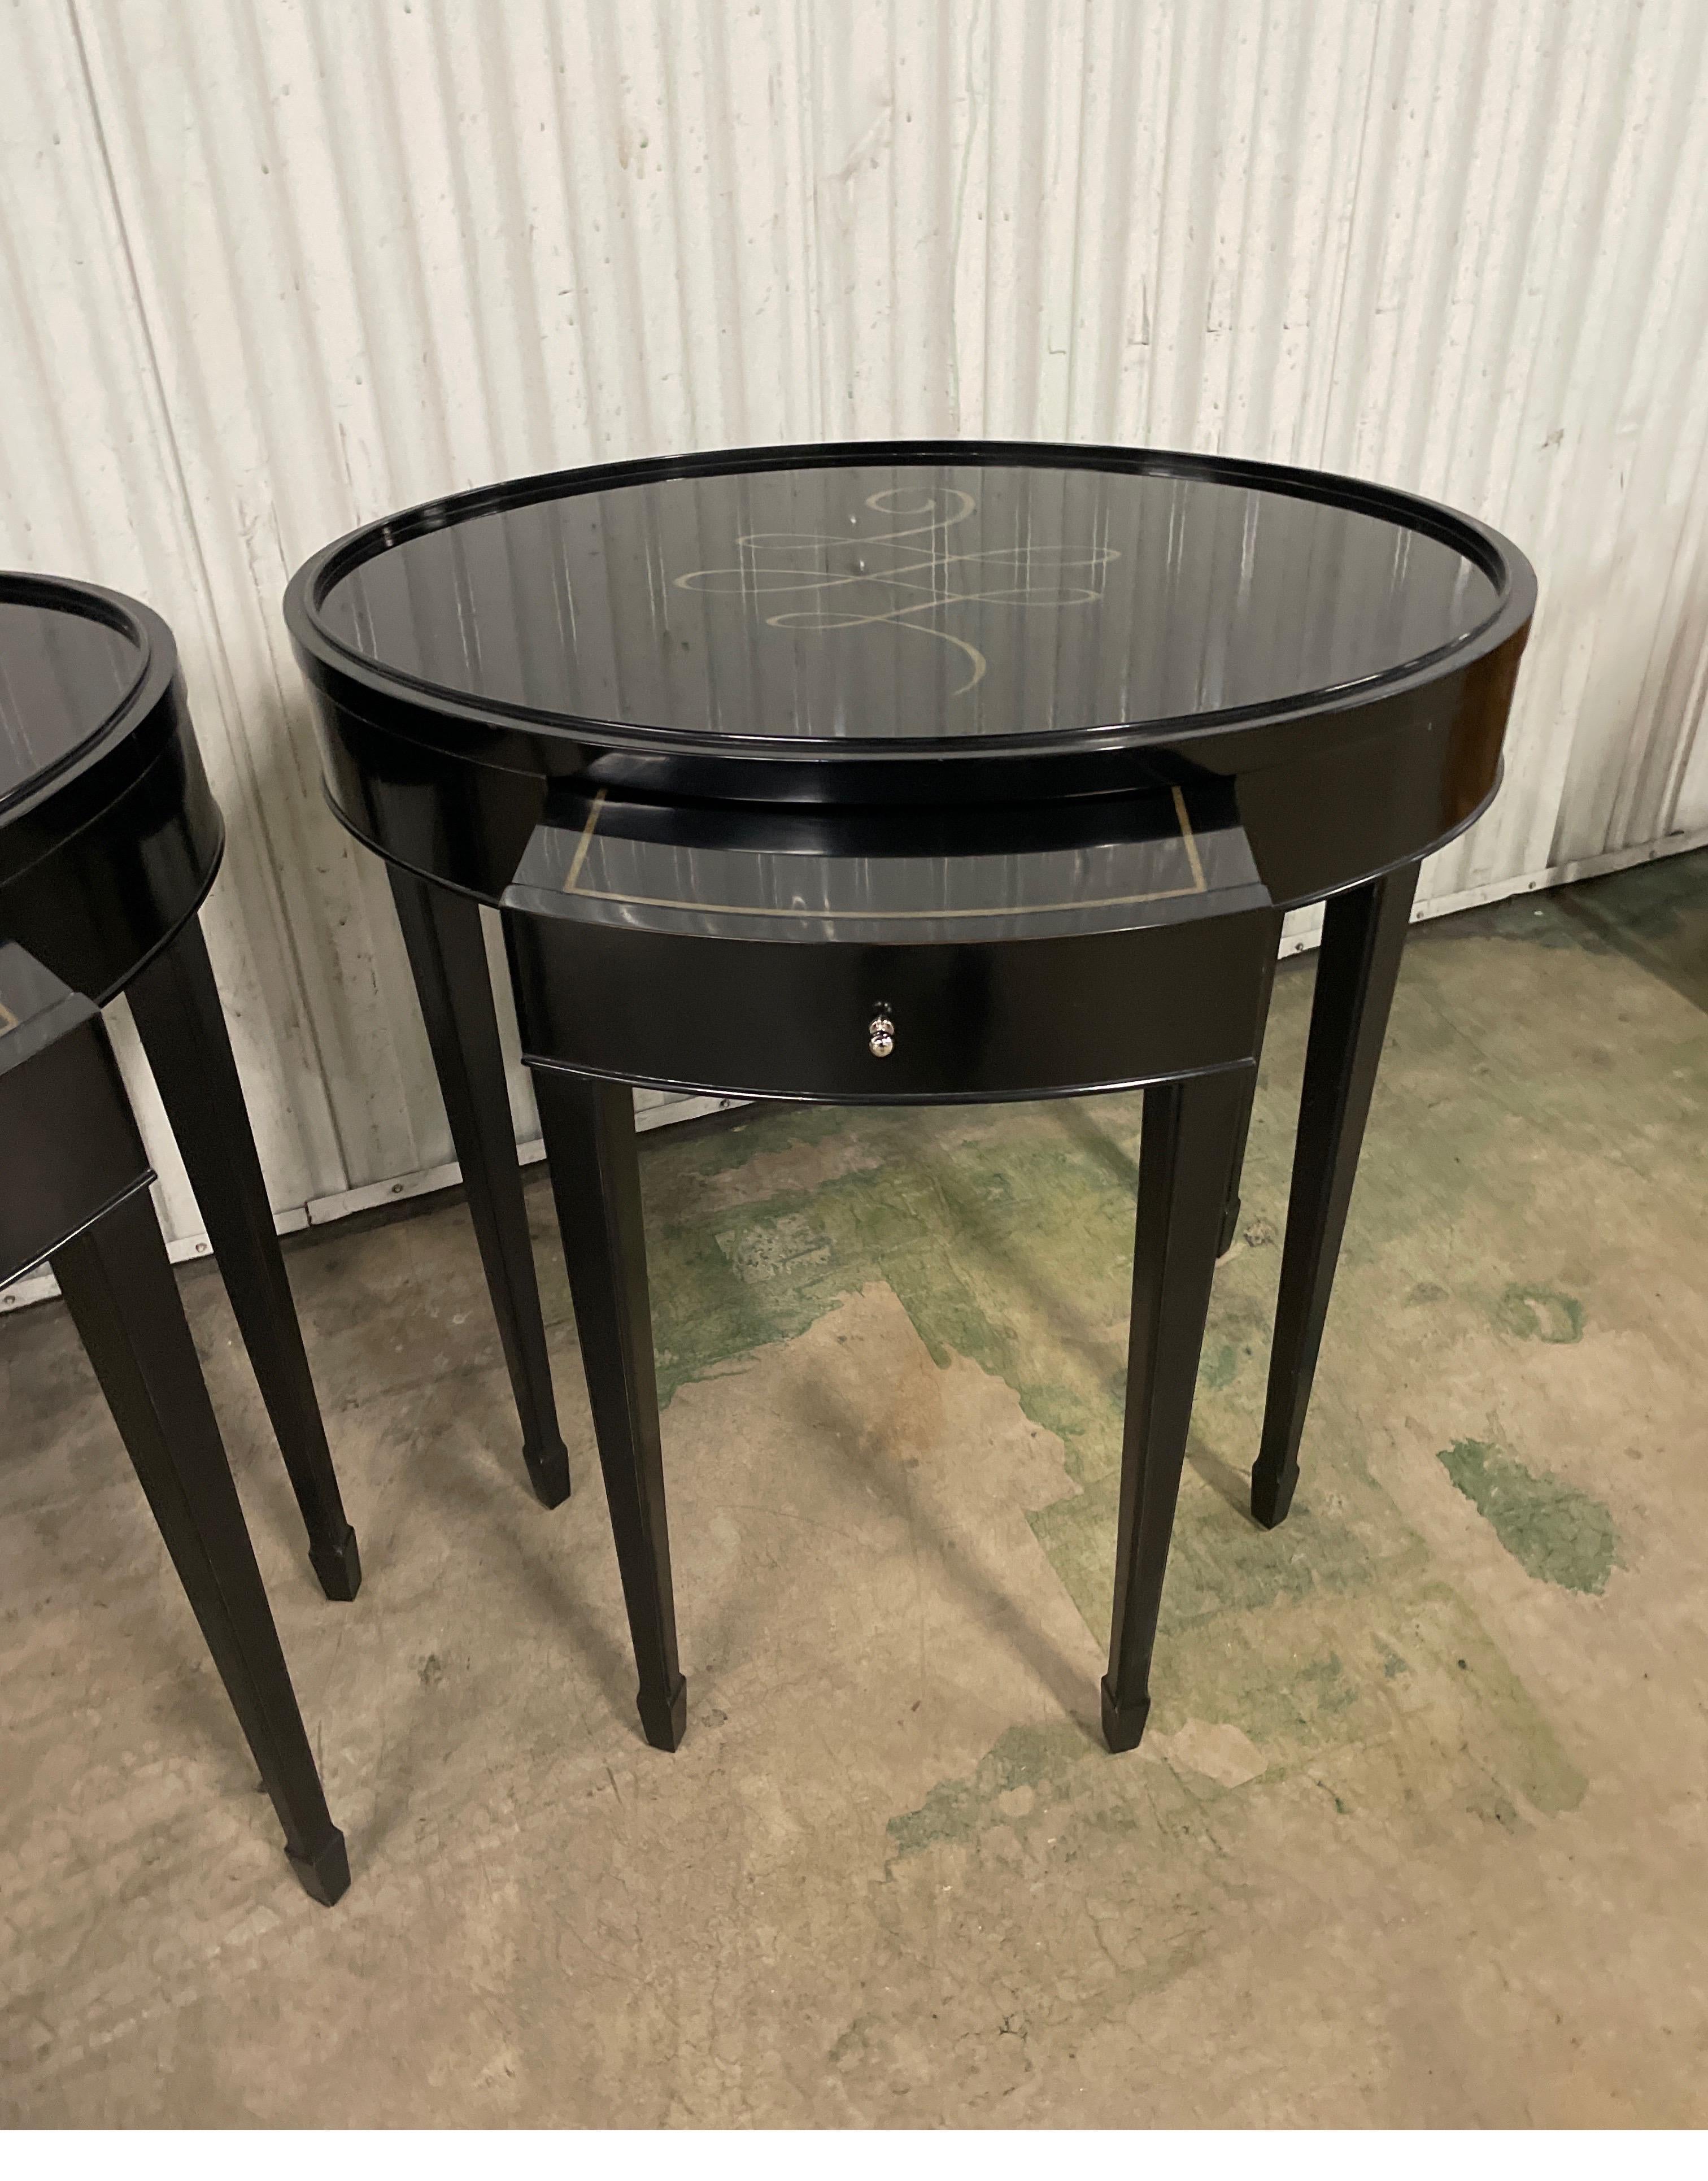 Pair of black lacquered oval end tables with gold calligraphy on the tops. Tables have a small pull-out at front for additional surface. These end tables were designed by Barbara Barry for Baker furniture co.